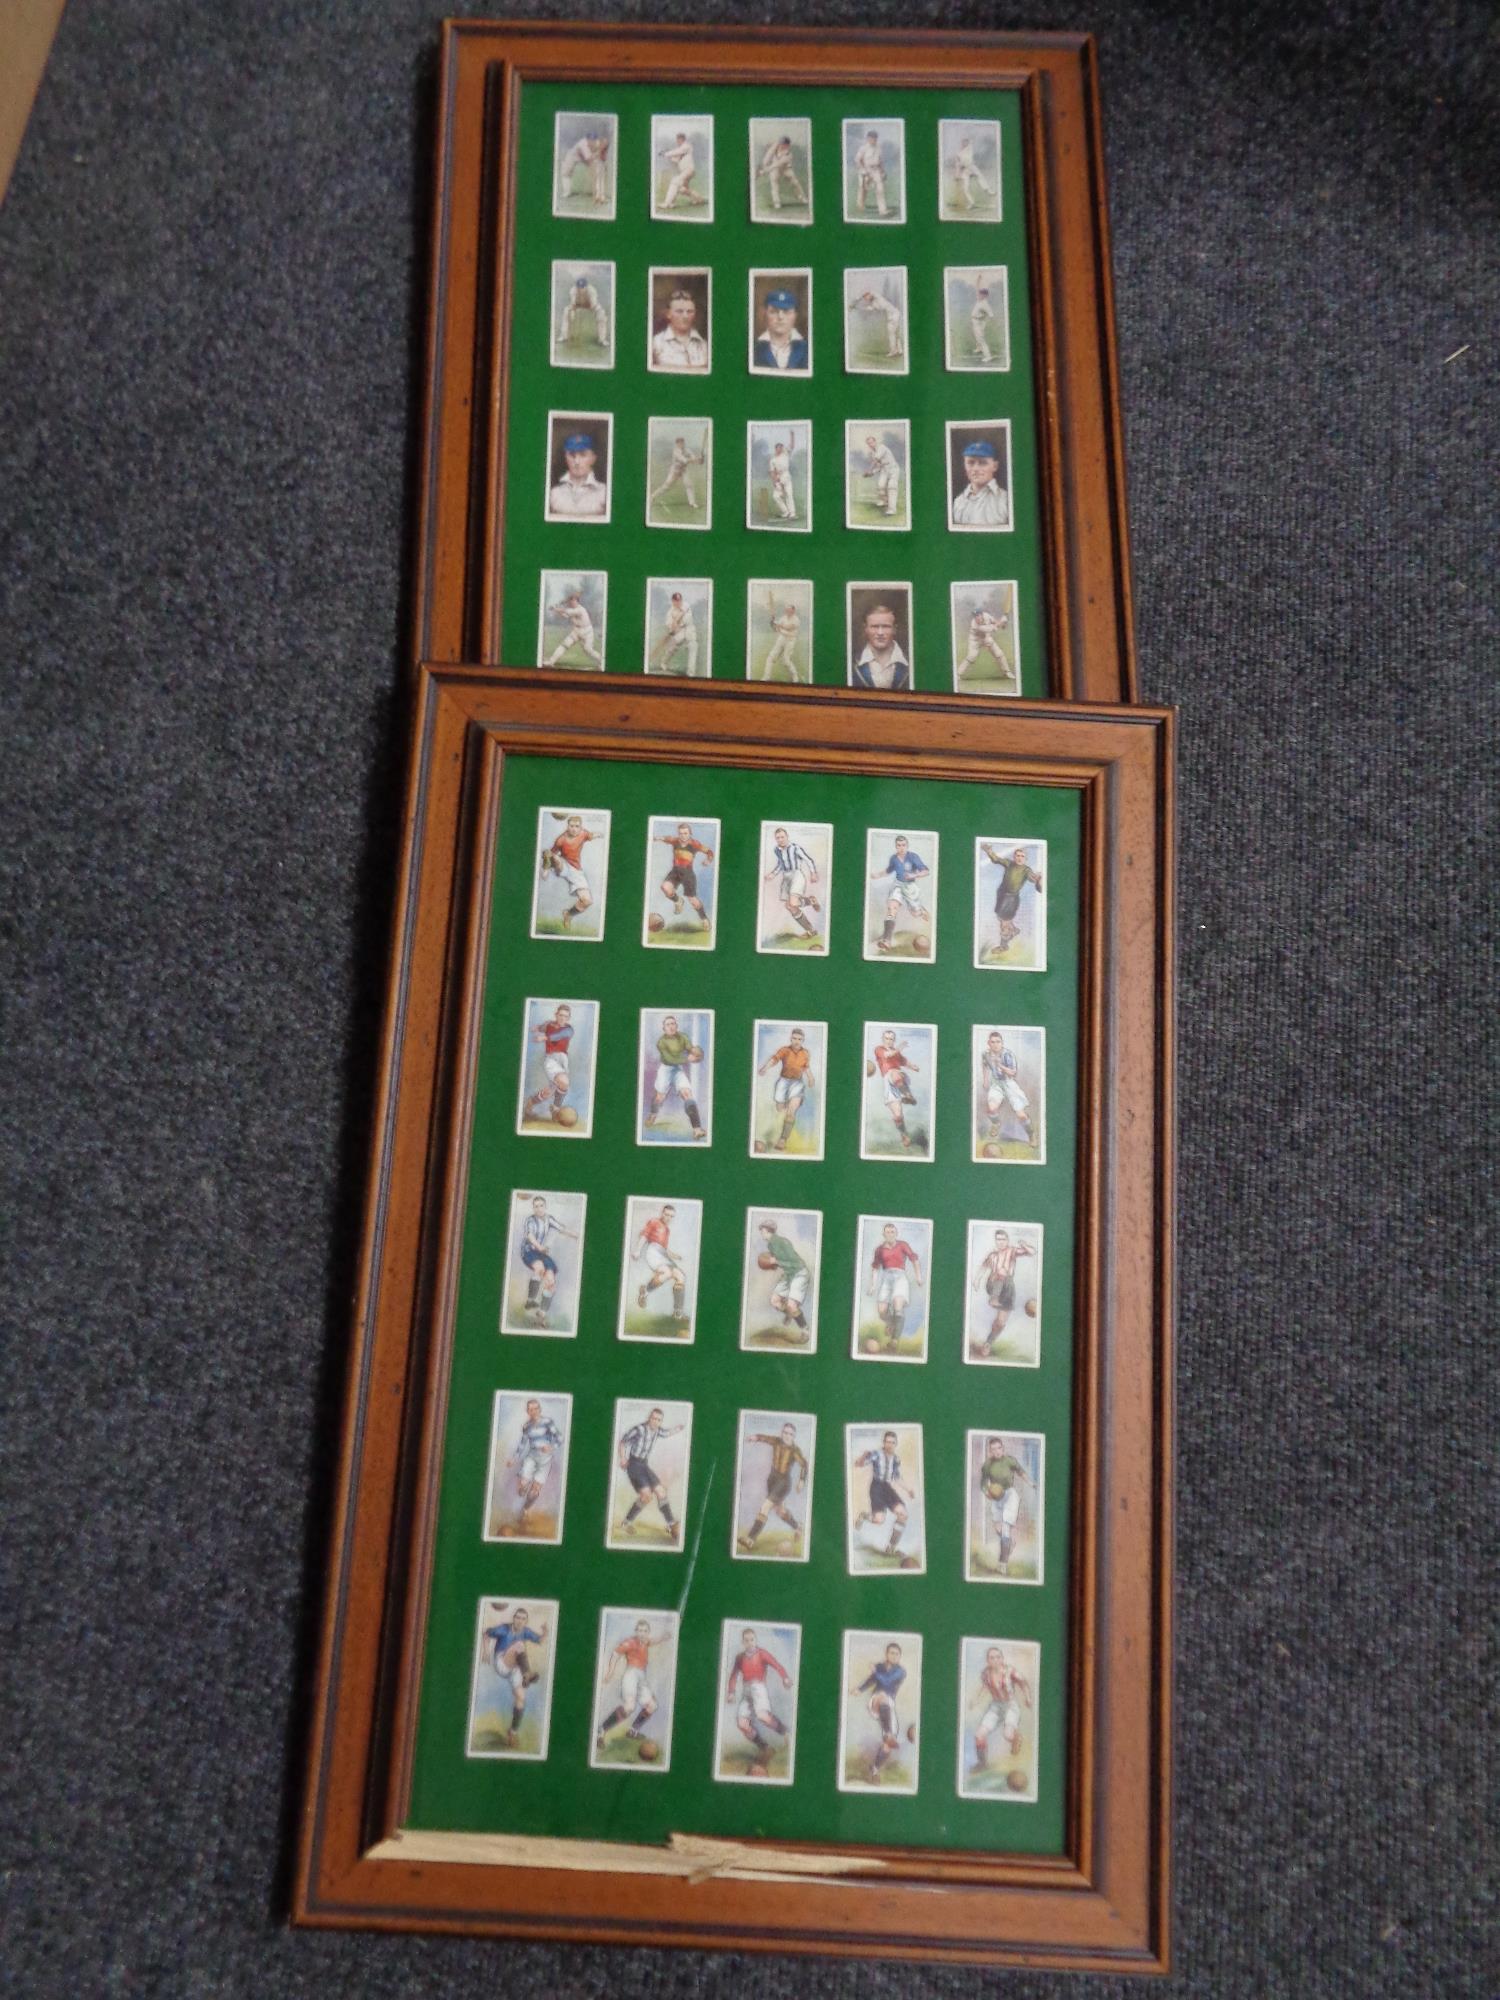 Two sets of players and wills cigarette cards - cricket and football (Af)